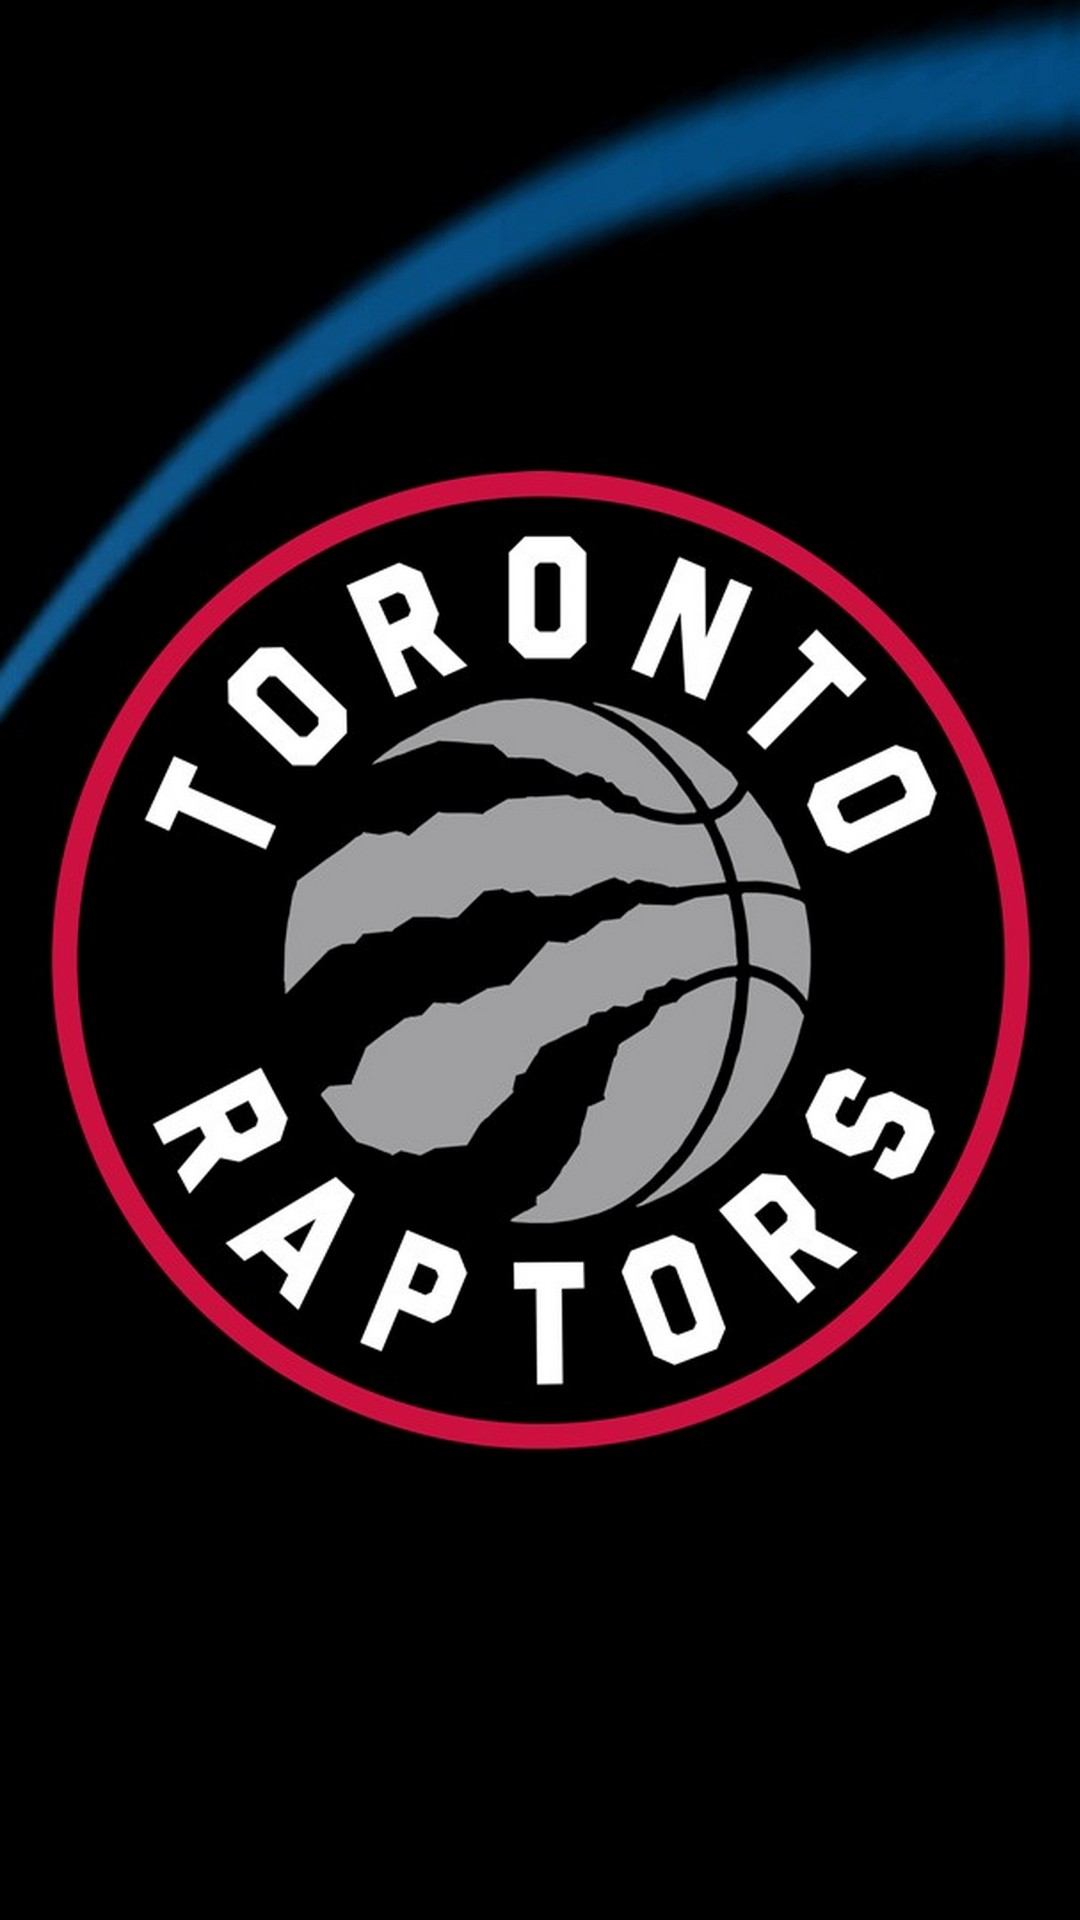 Toronto Raptors Wallpaper iPhone with image resolution 1080x1920 pixel. You can make this wallpaper for your iPhone 5, 6, 7, 8, X backgrounds, Mobile Screensaver, or iPad Lock Screen